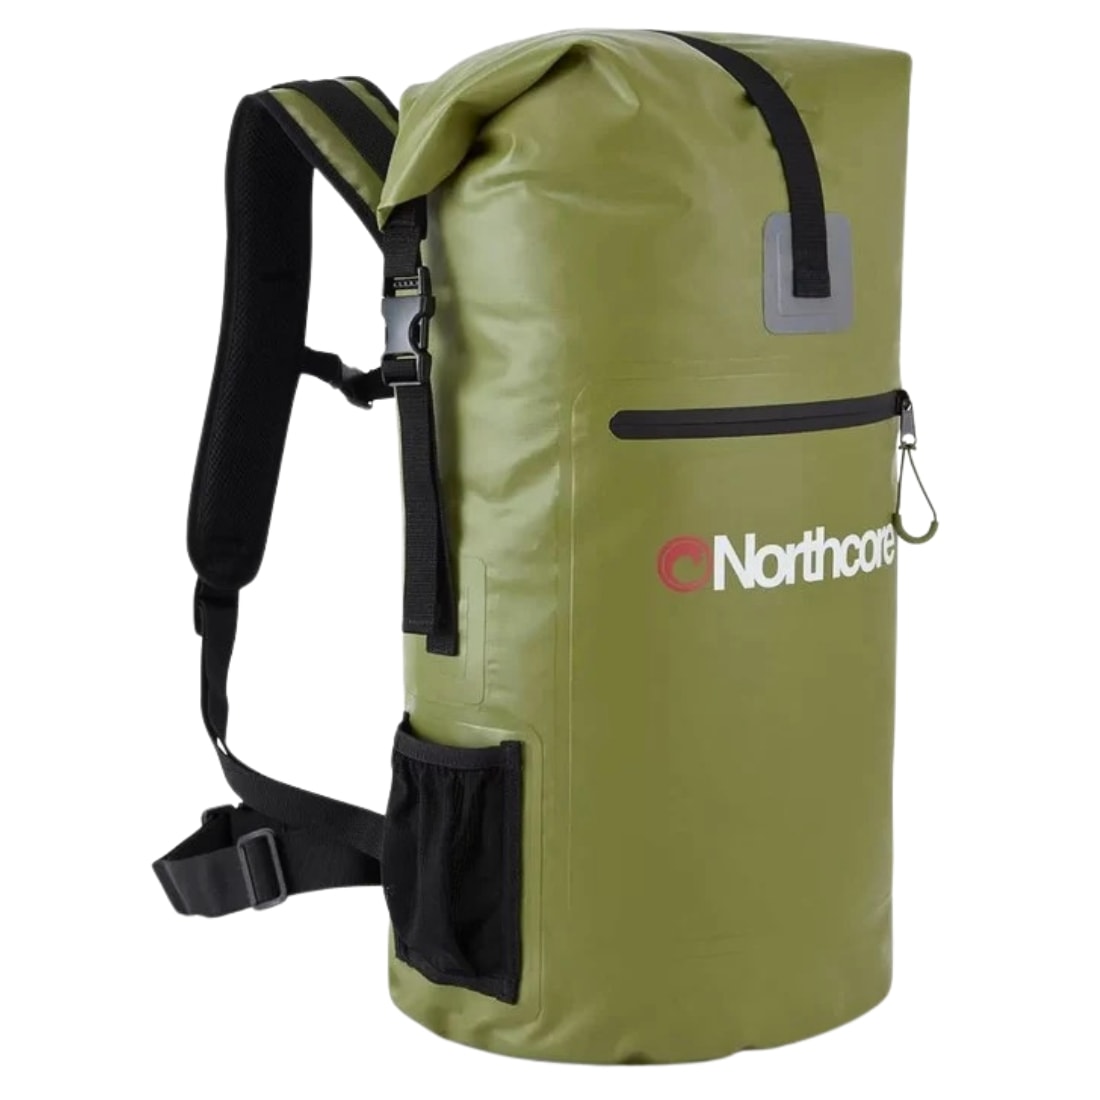 Northcore 30L Waterproof Haul Backpack - Olive - Wet/Dry Bag by Northcore 30L